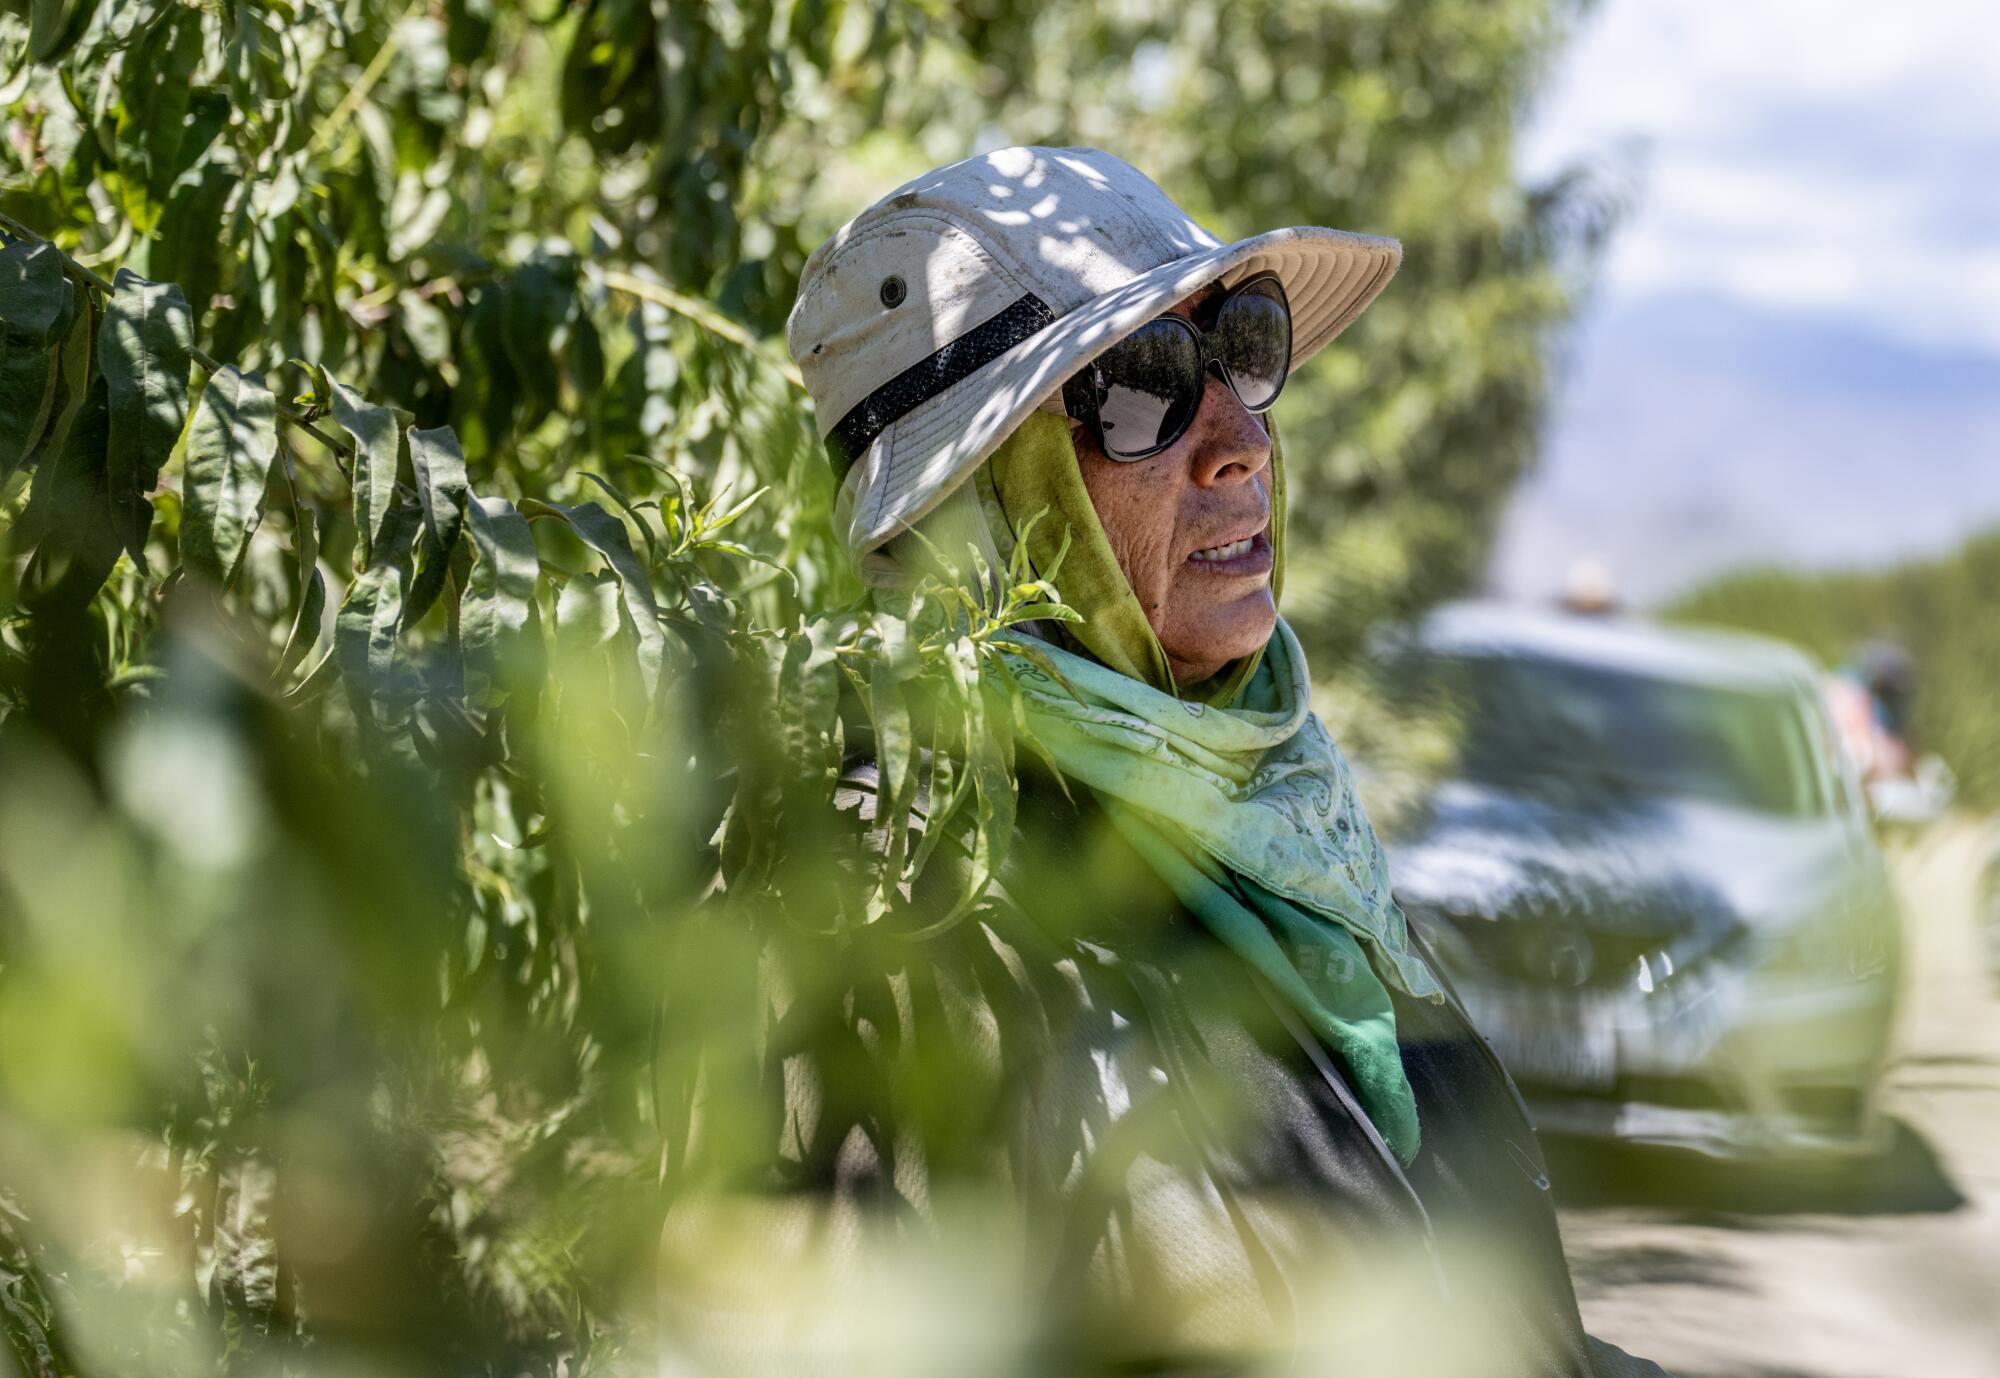 A female farmworker stands next to a peach tree wearing sunglasses, a hat and bandanna.